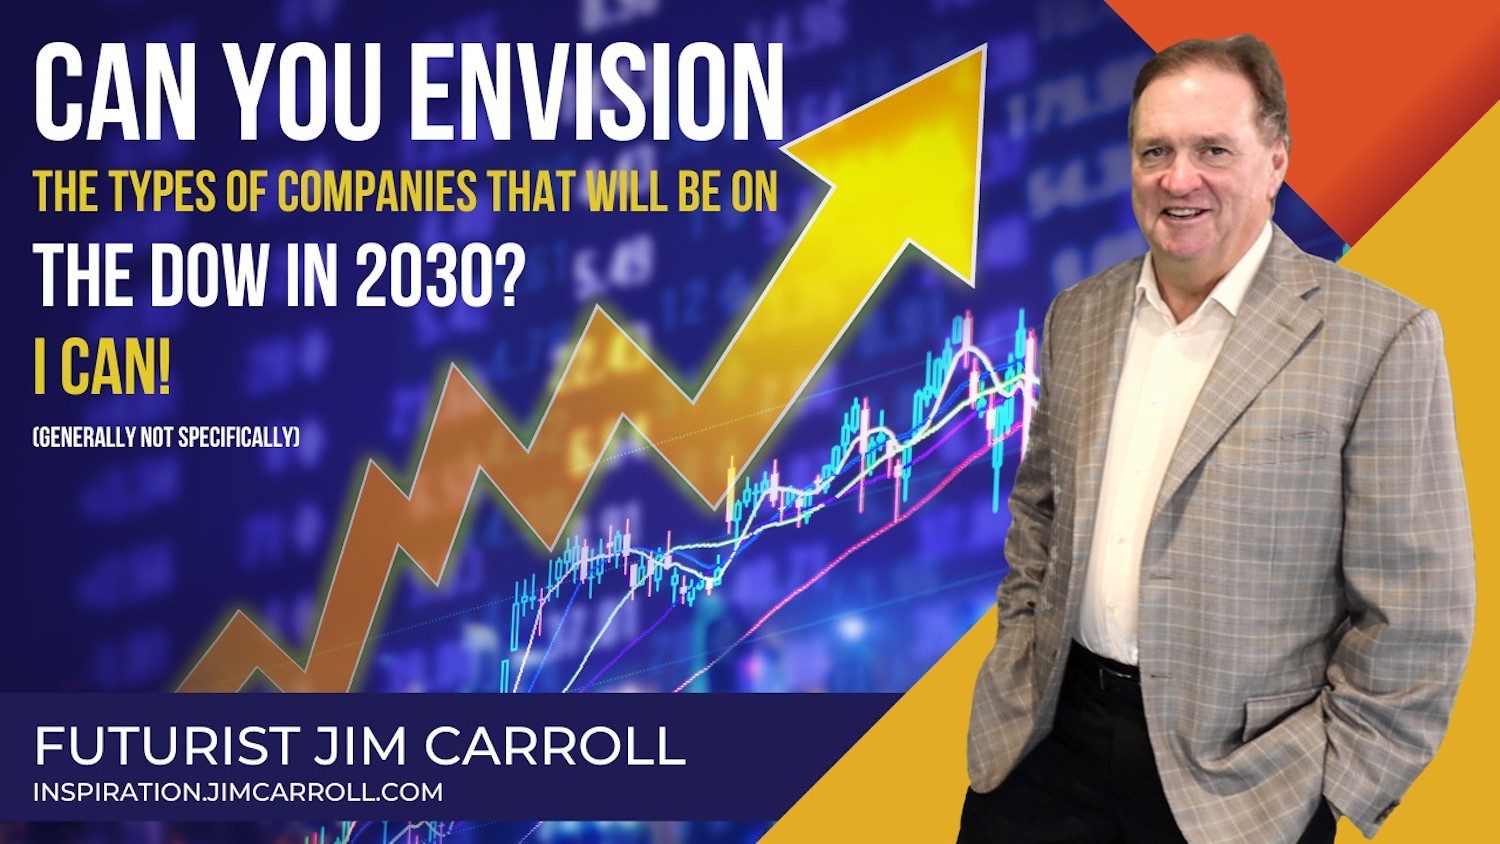 "Can you envision the types of companies that will be on the dow in 2030? I can!" - Futurist Jim Carroll